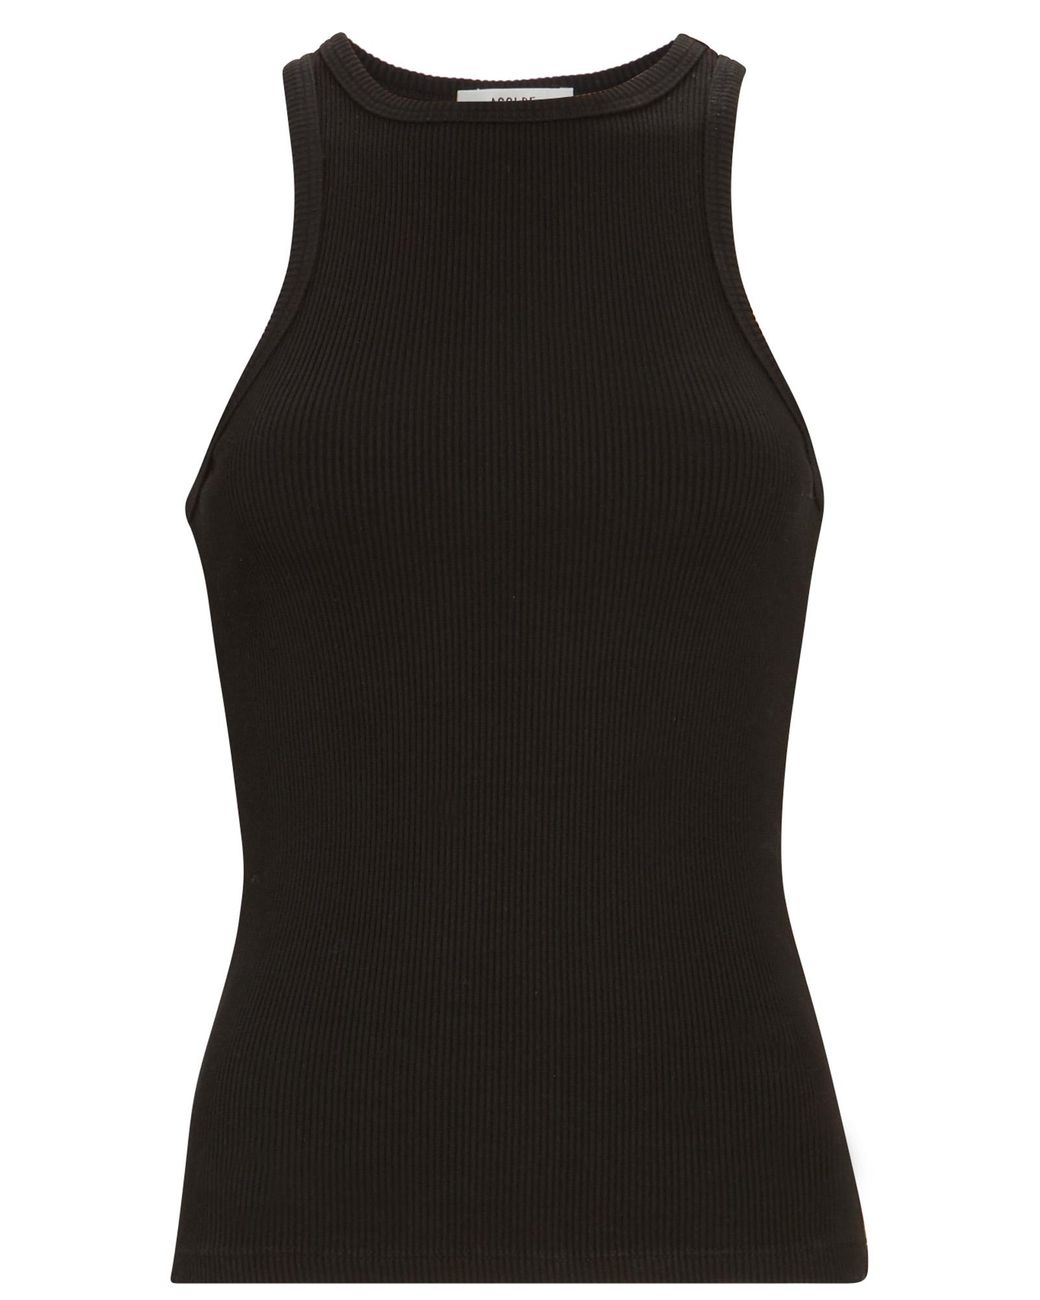 Agolde Synthetic High Neck Rib Knit Tank Top in Black - Lyst